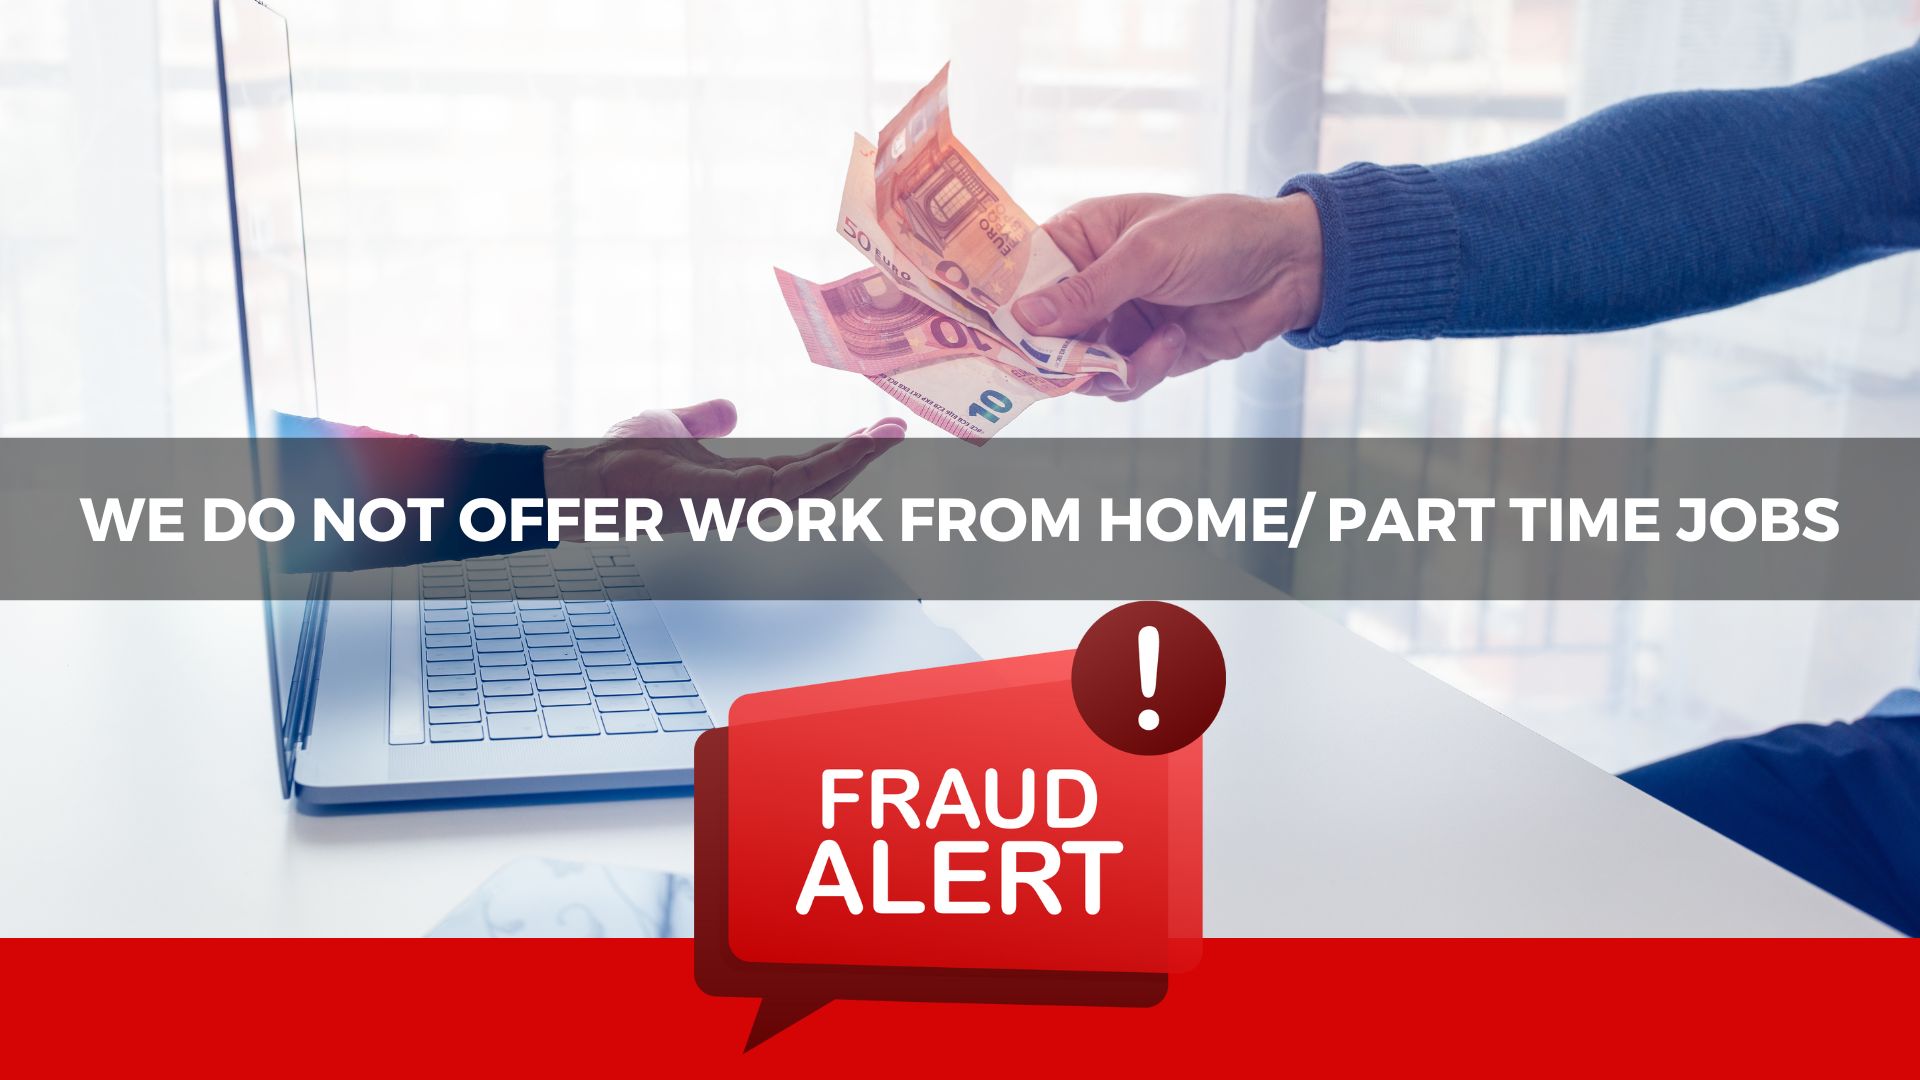 Stay Away from Job Offer SCAM, We Recruit Eligible Candidates Based on Their Talent Only